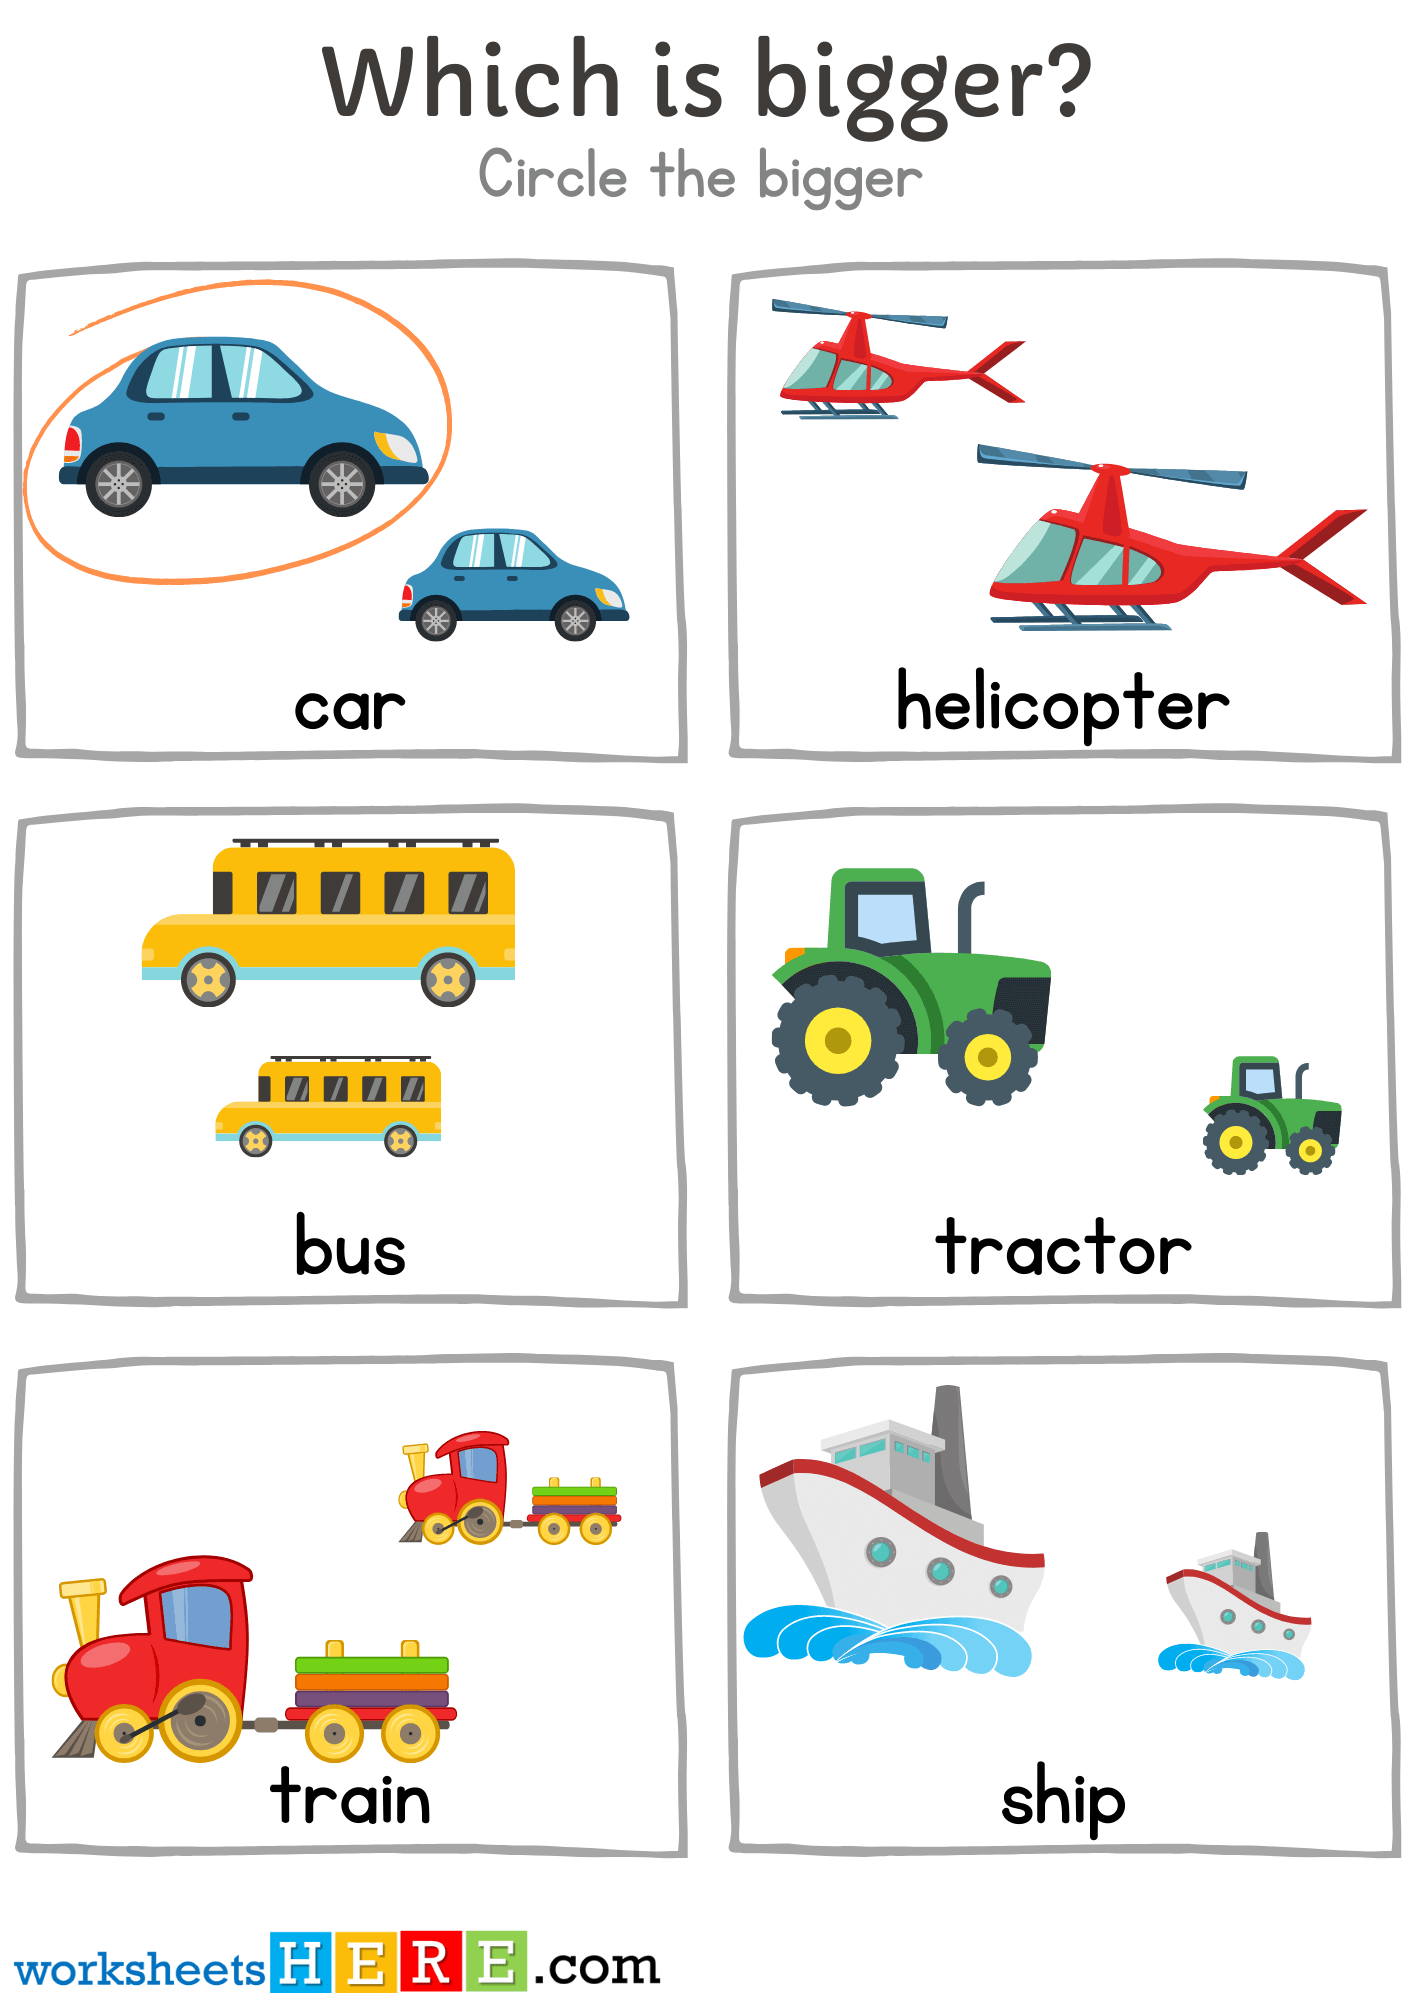 Which is bigger? Finding Bigger Objects Activity PDF Worksheets For Kindergarten